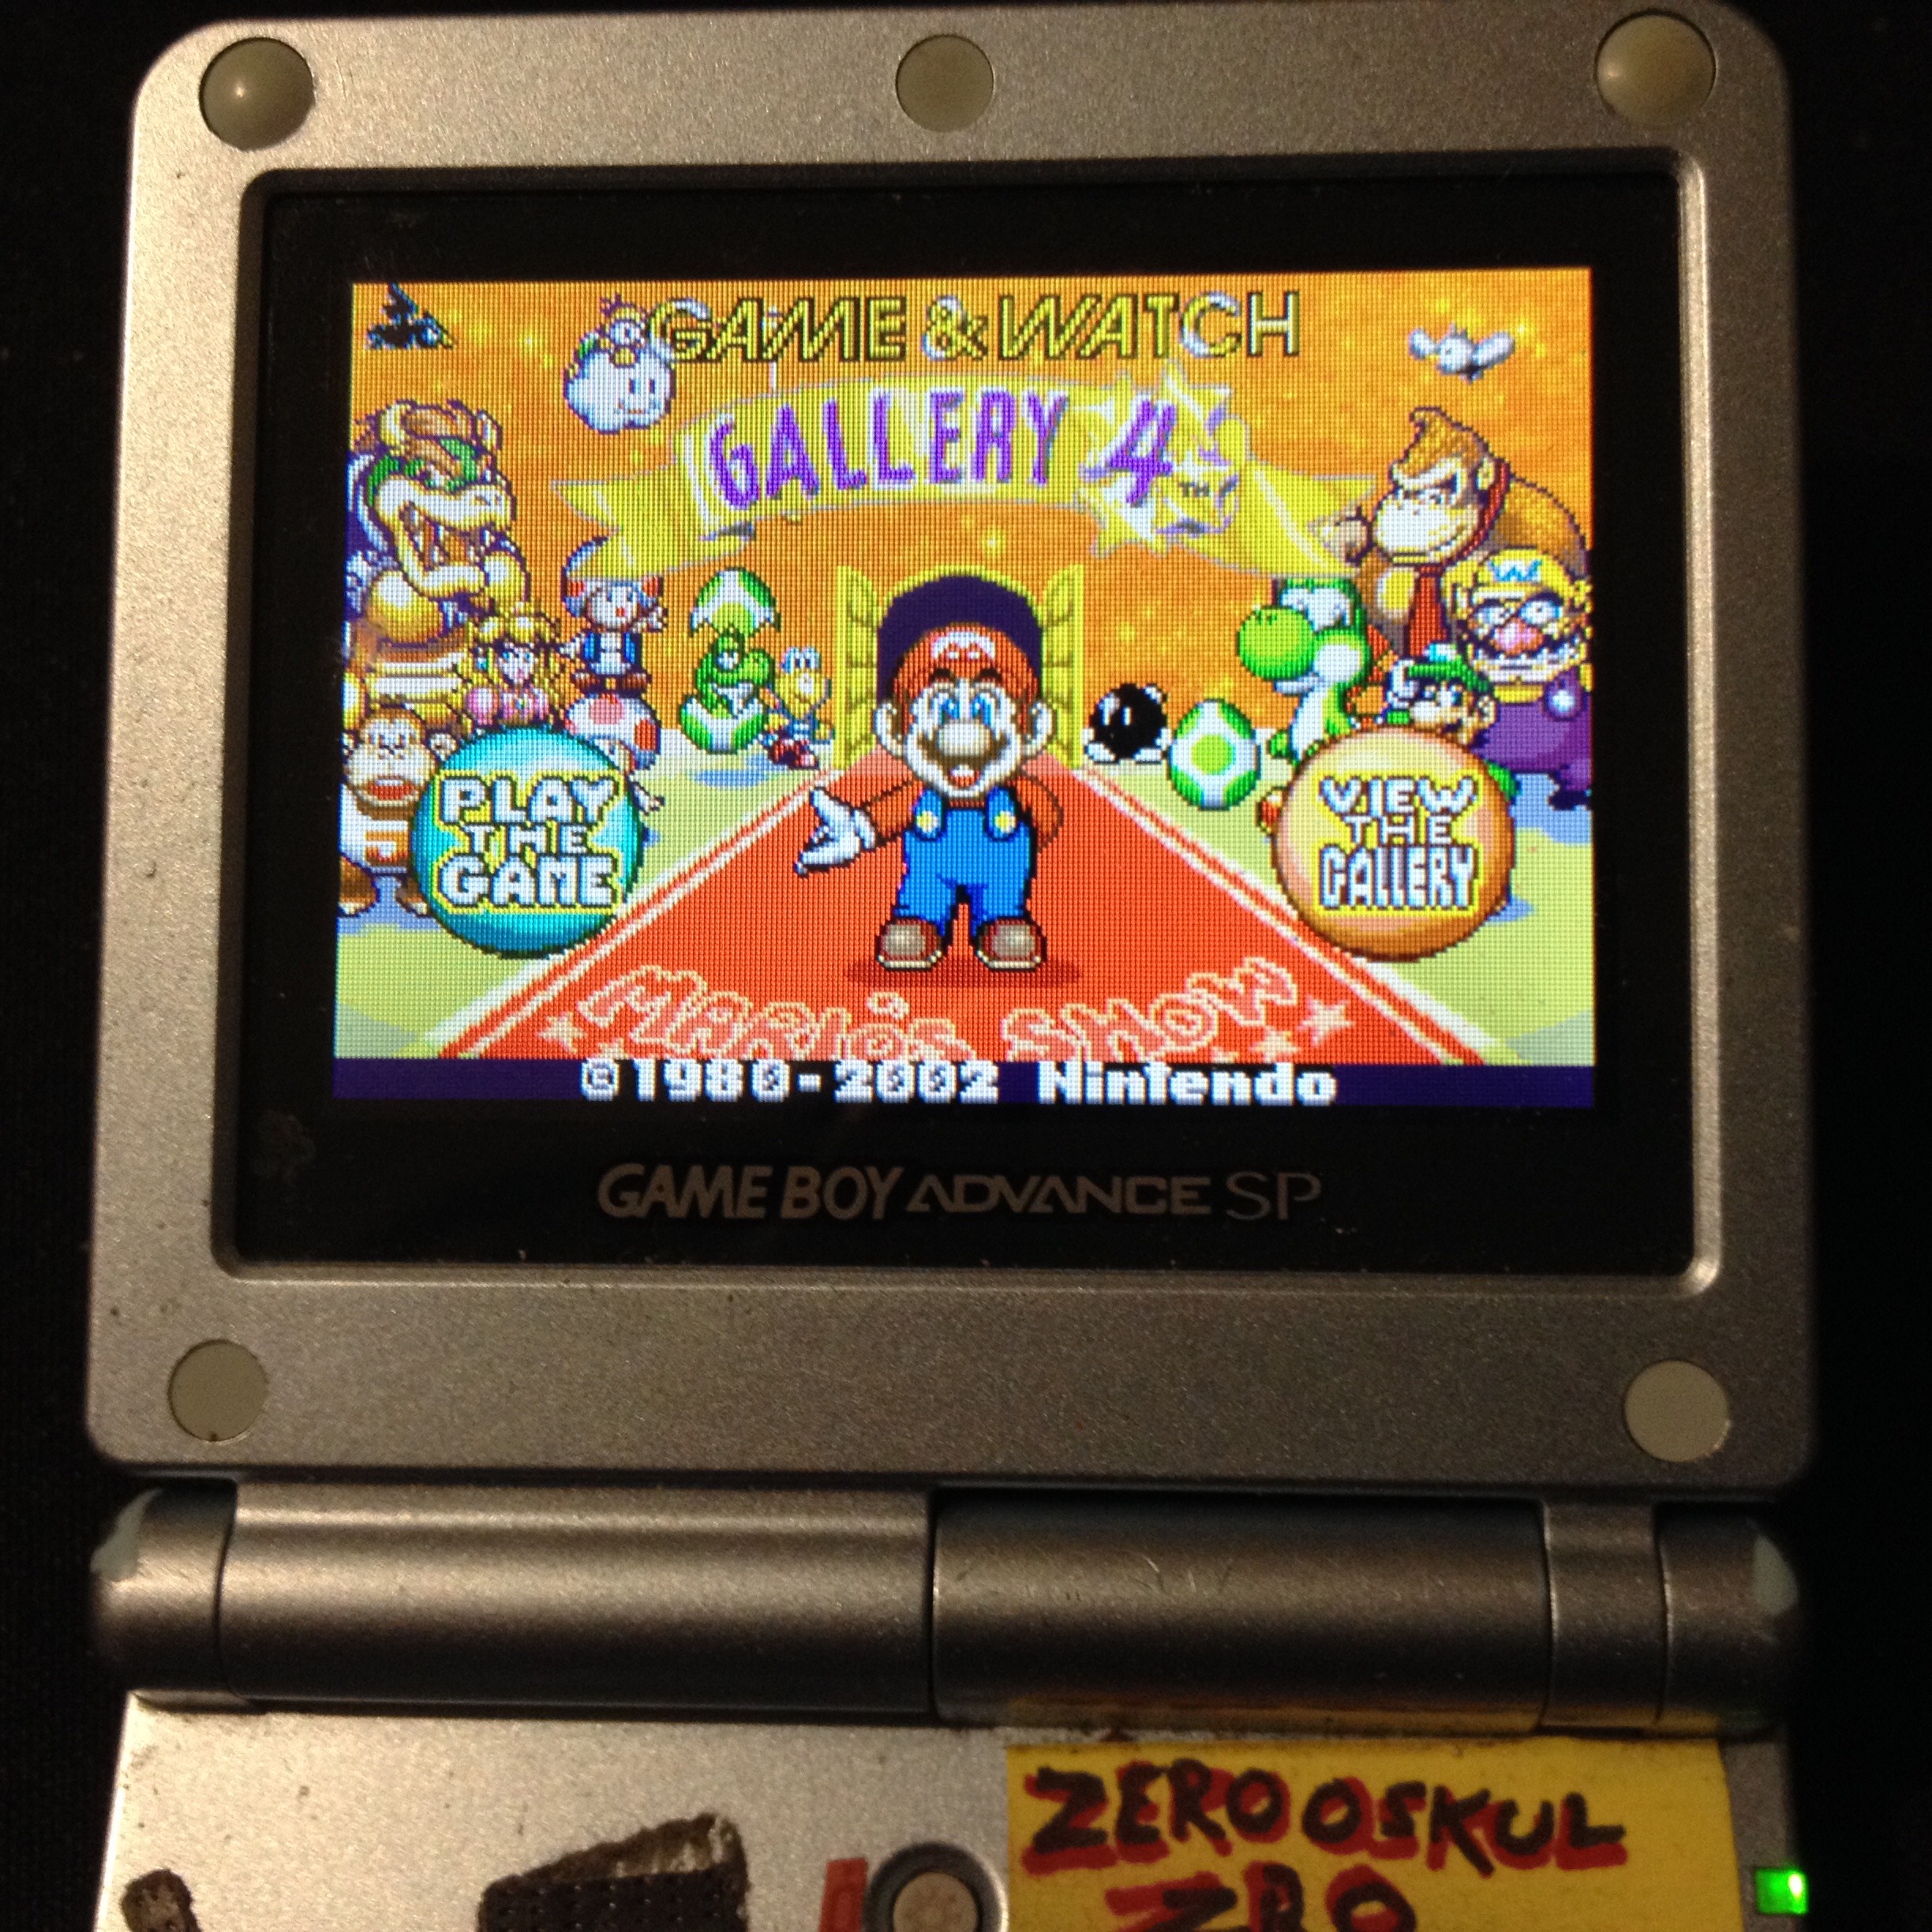 zerooskul: Game & Watch Gallery 4: Fire [Classic: Easy] (GBA) 869 points on 2019-12-14 22:39:54